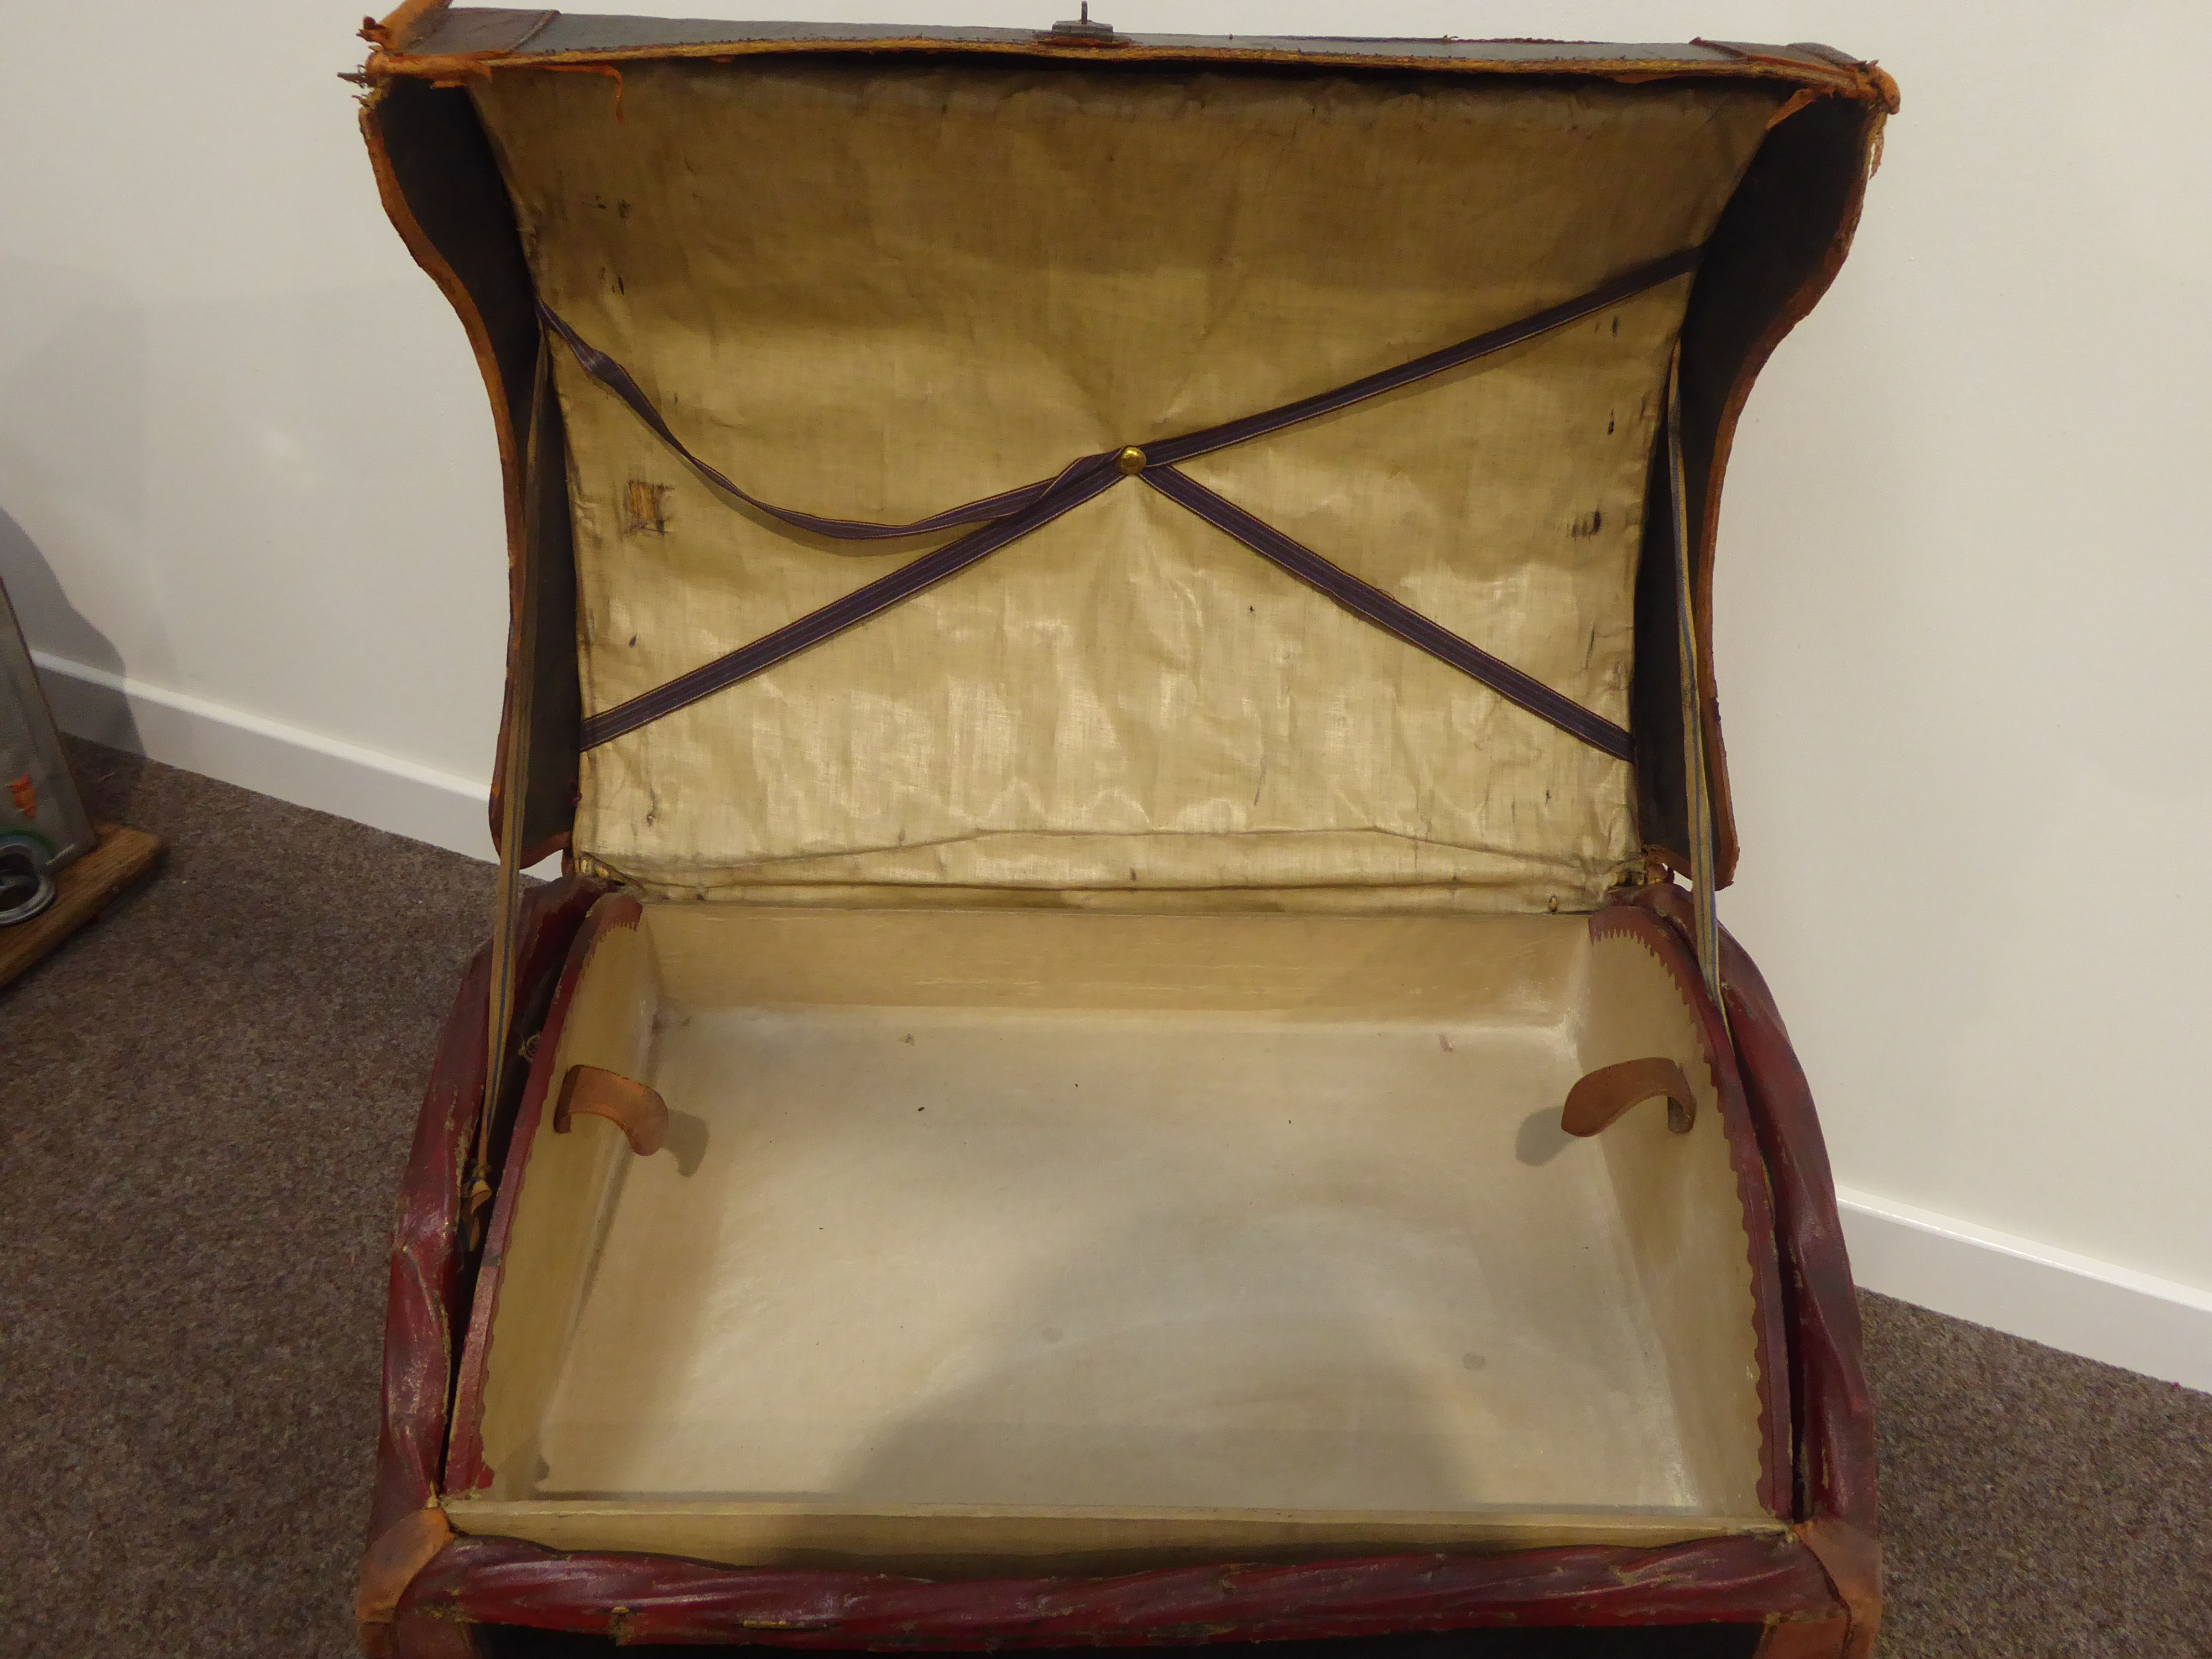 Early 20th century leather dome top travelling trunk with removable tray (W70cm, H60cm, D50cm), - Image 2 of 2